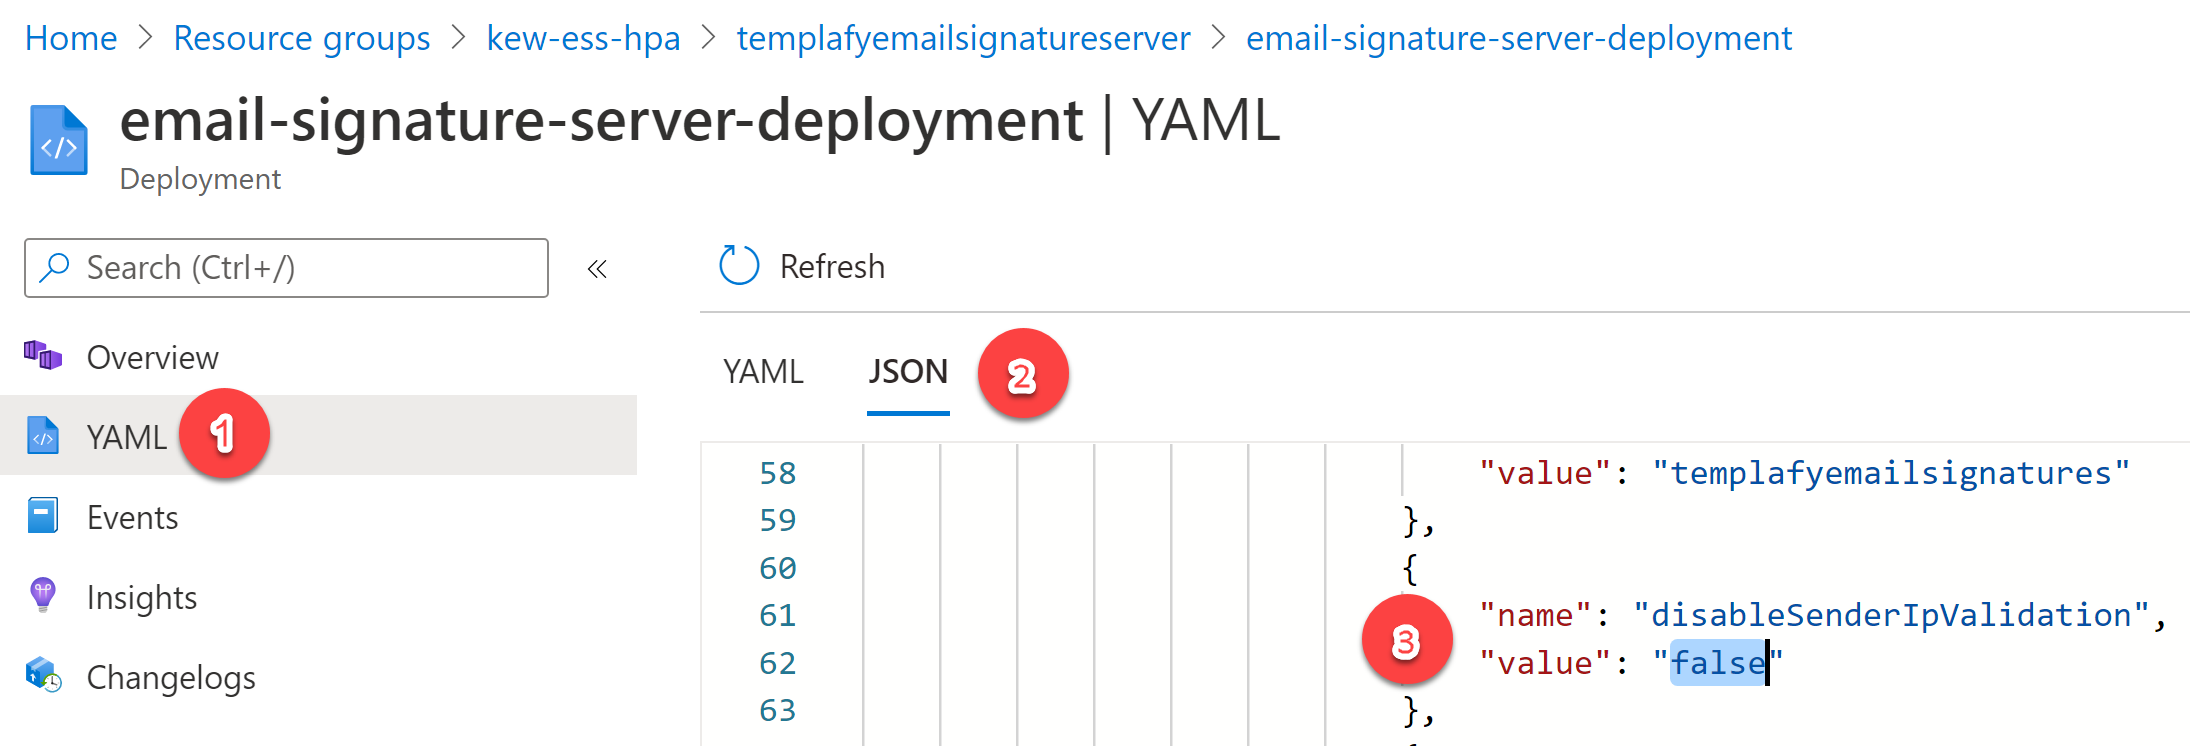 email-signature-server-deployment_YAML_update.png